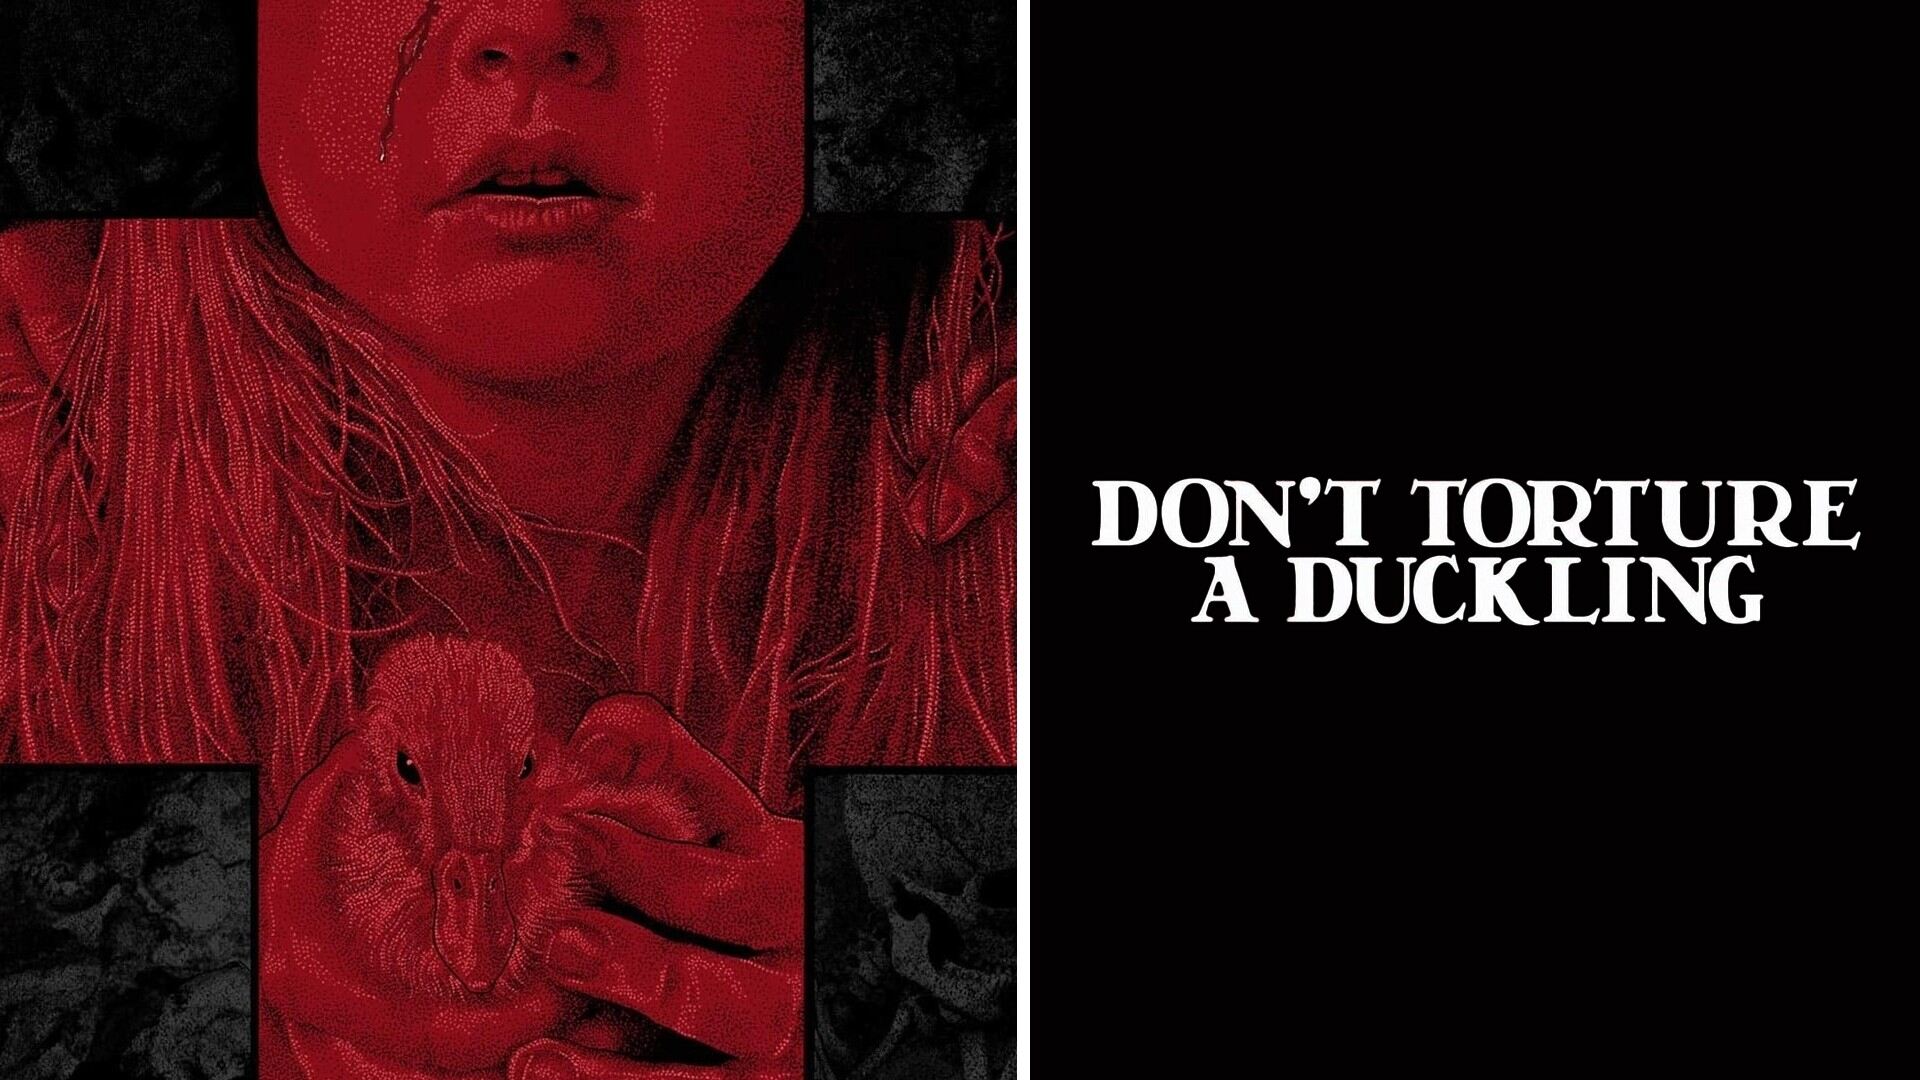 34-facts-about-the-movie-dont-torture-a-duckling